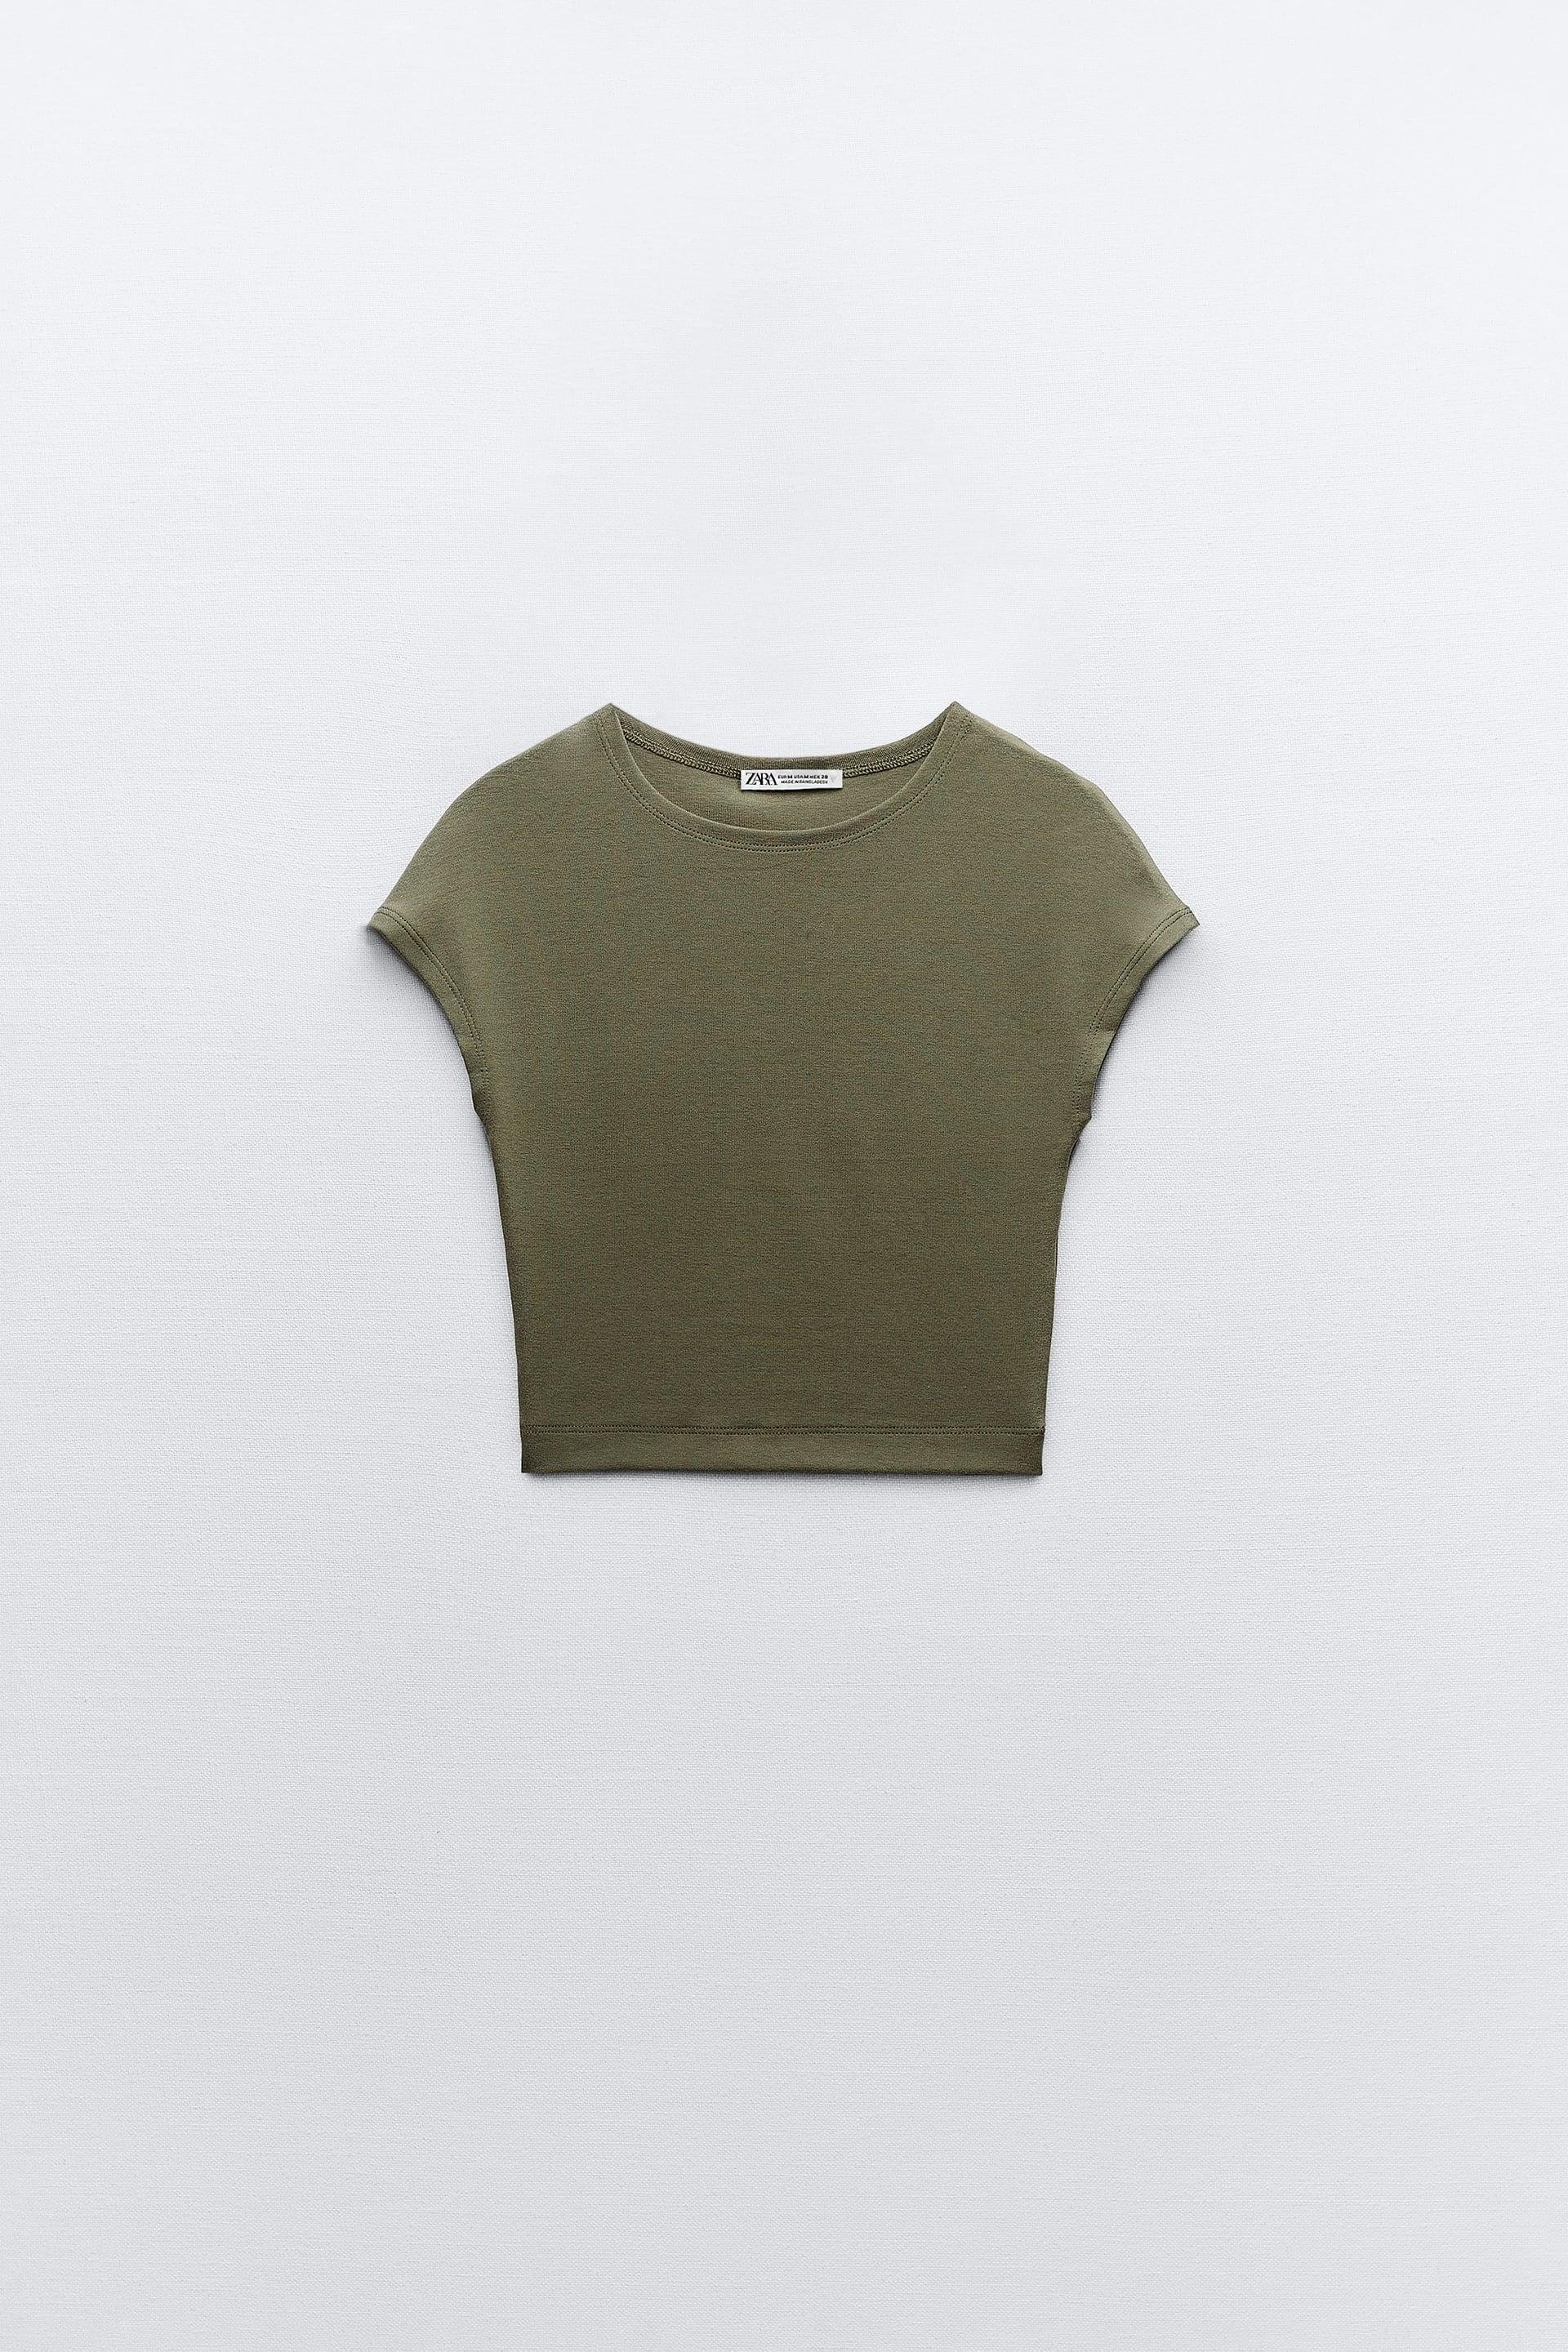 COTTON AND MODAL CROP TOP by ZARA